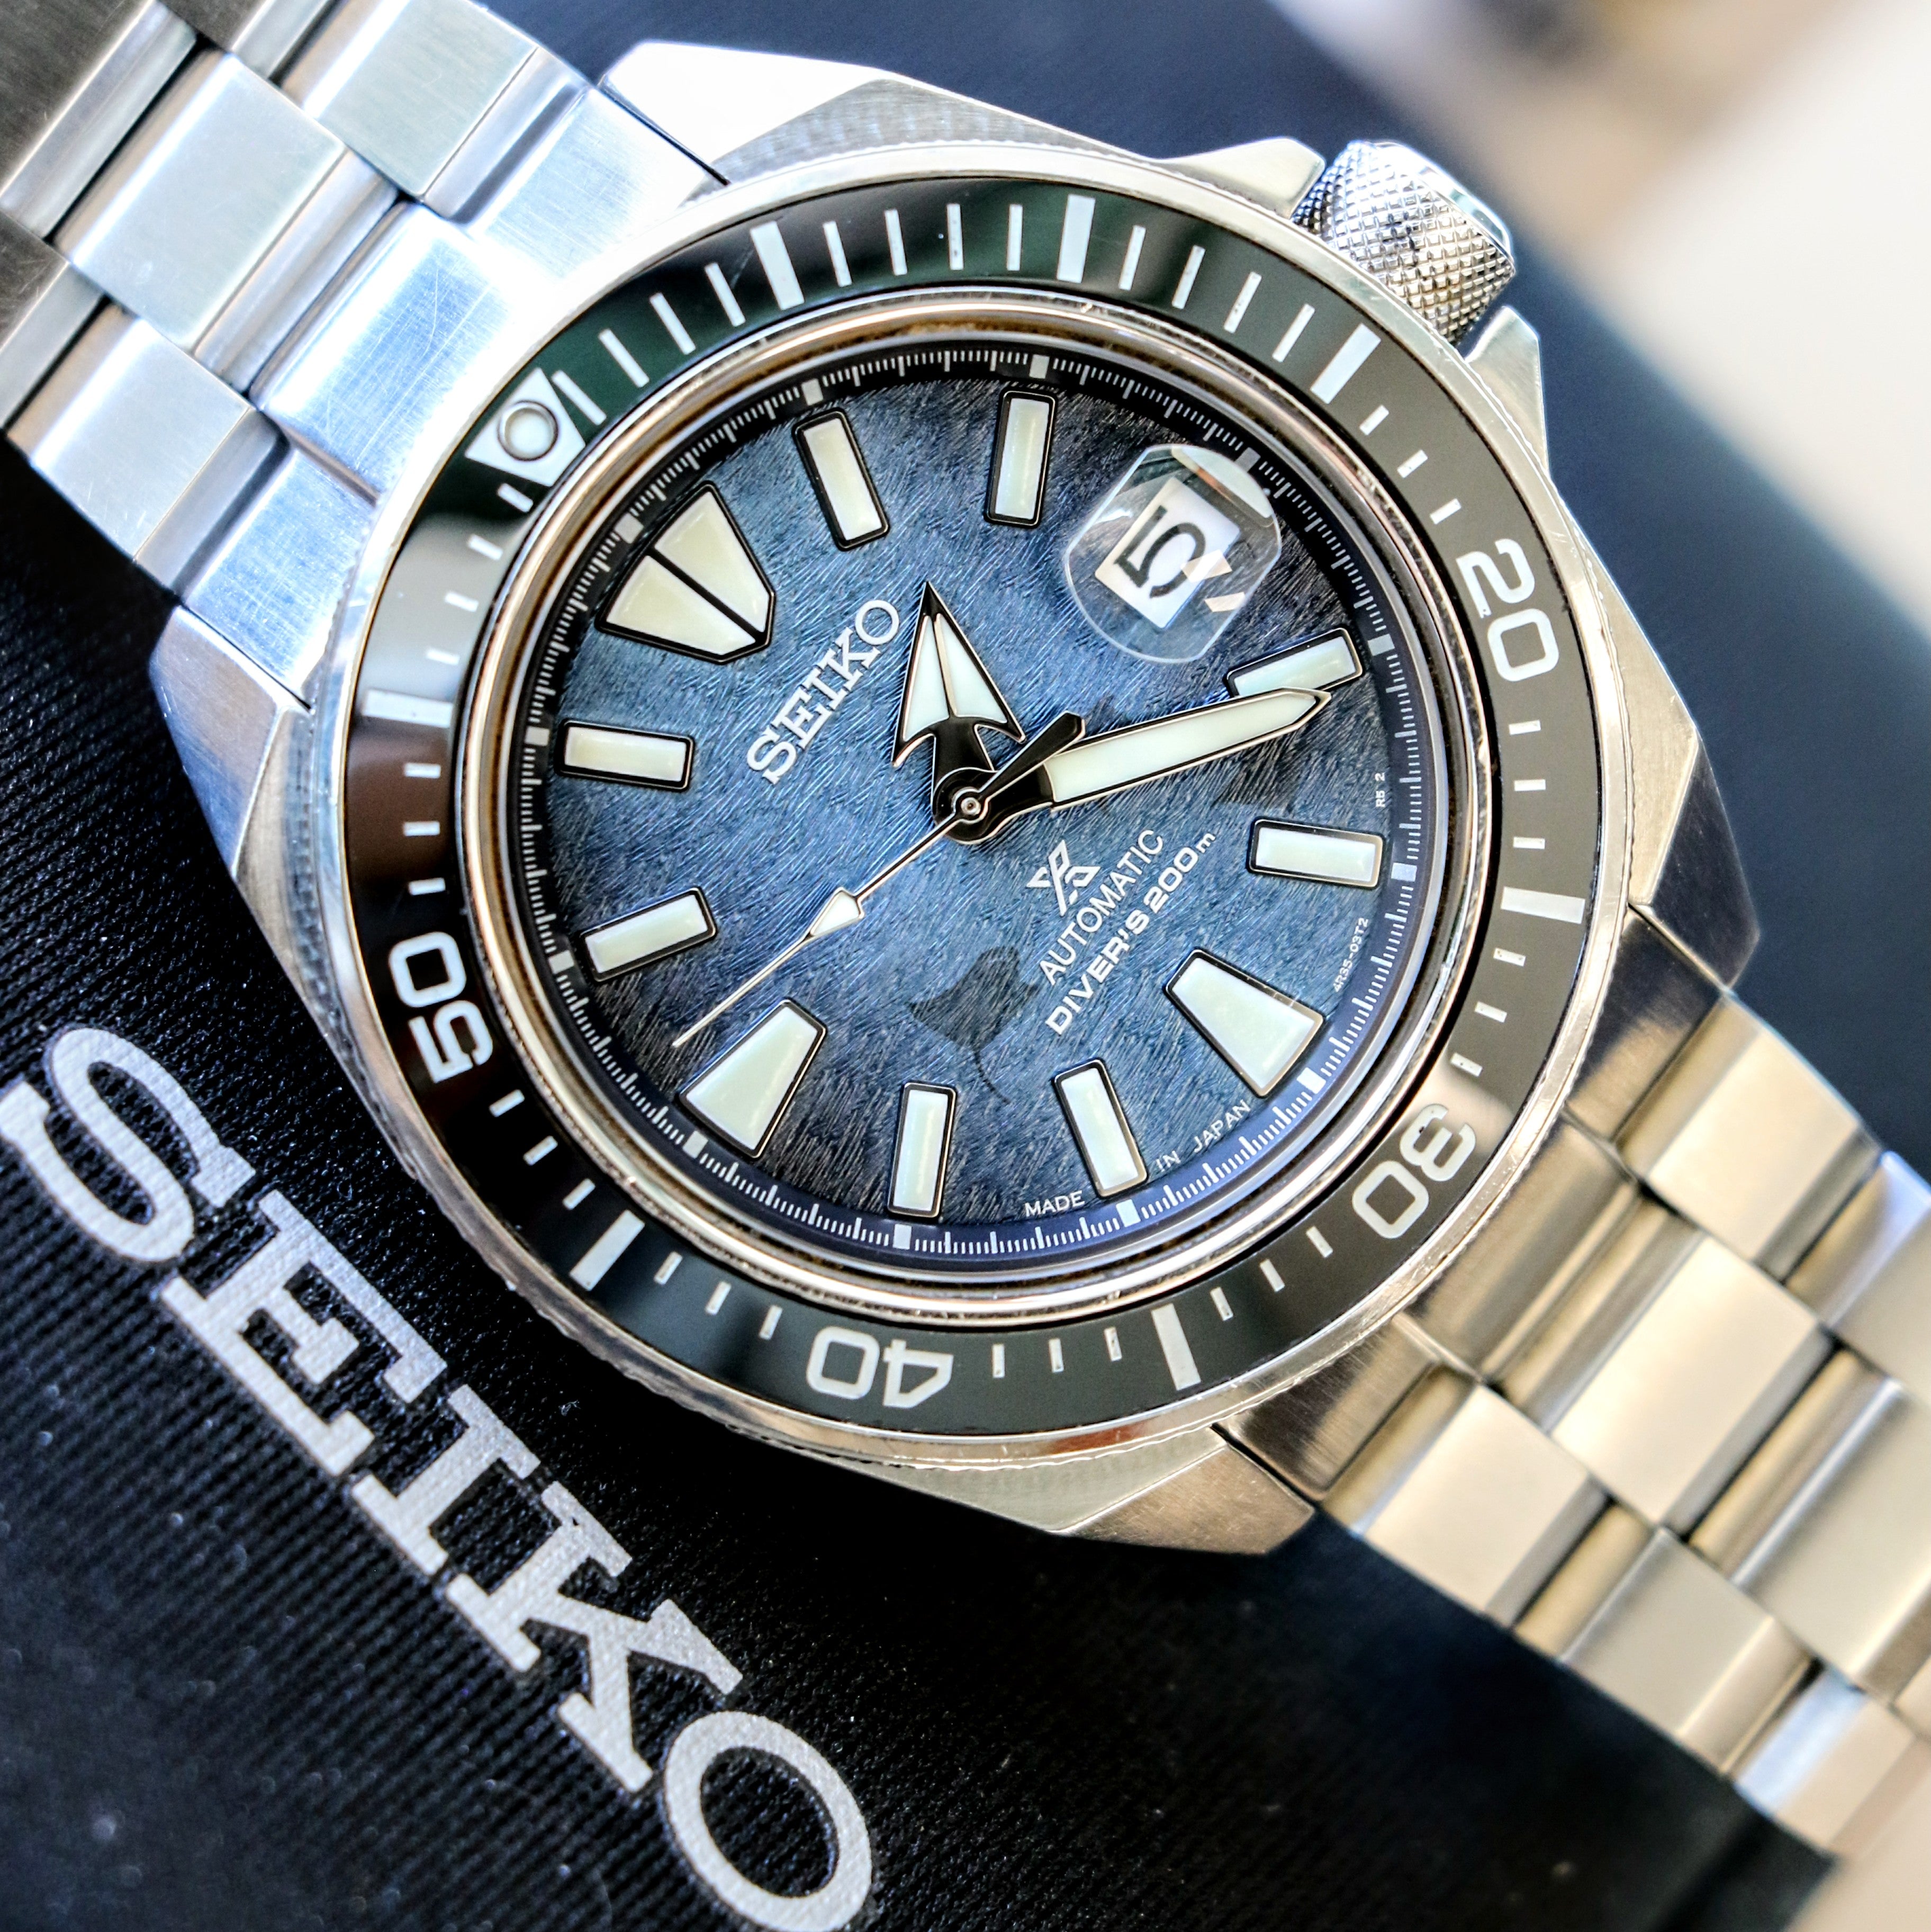 2020 SEIKO Prospex Save the Ocean Special Edition “Manta Ray” Automatic Wristwatch Diver’s Watch Ref. SRPE33